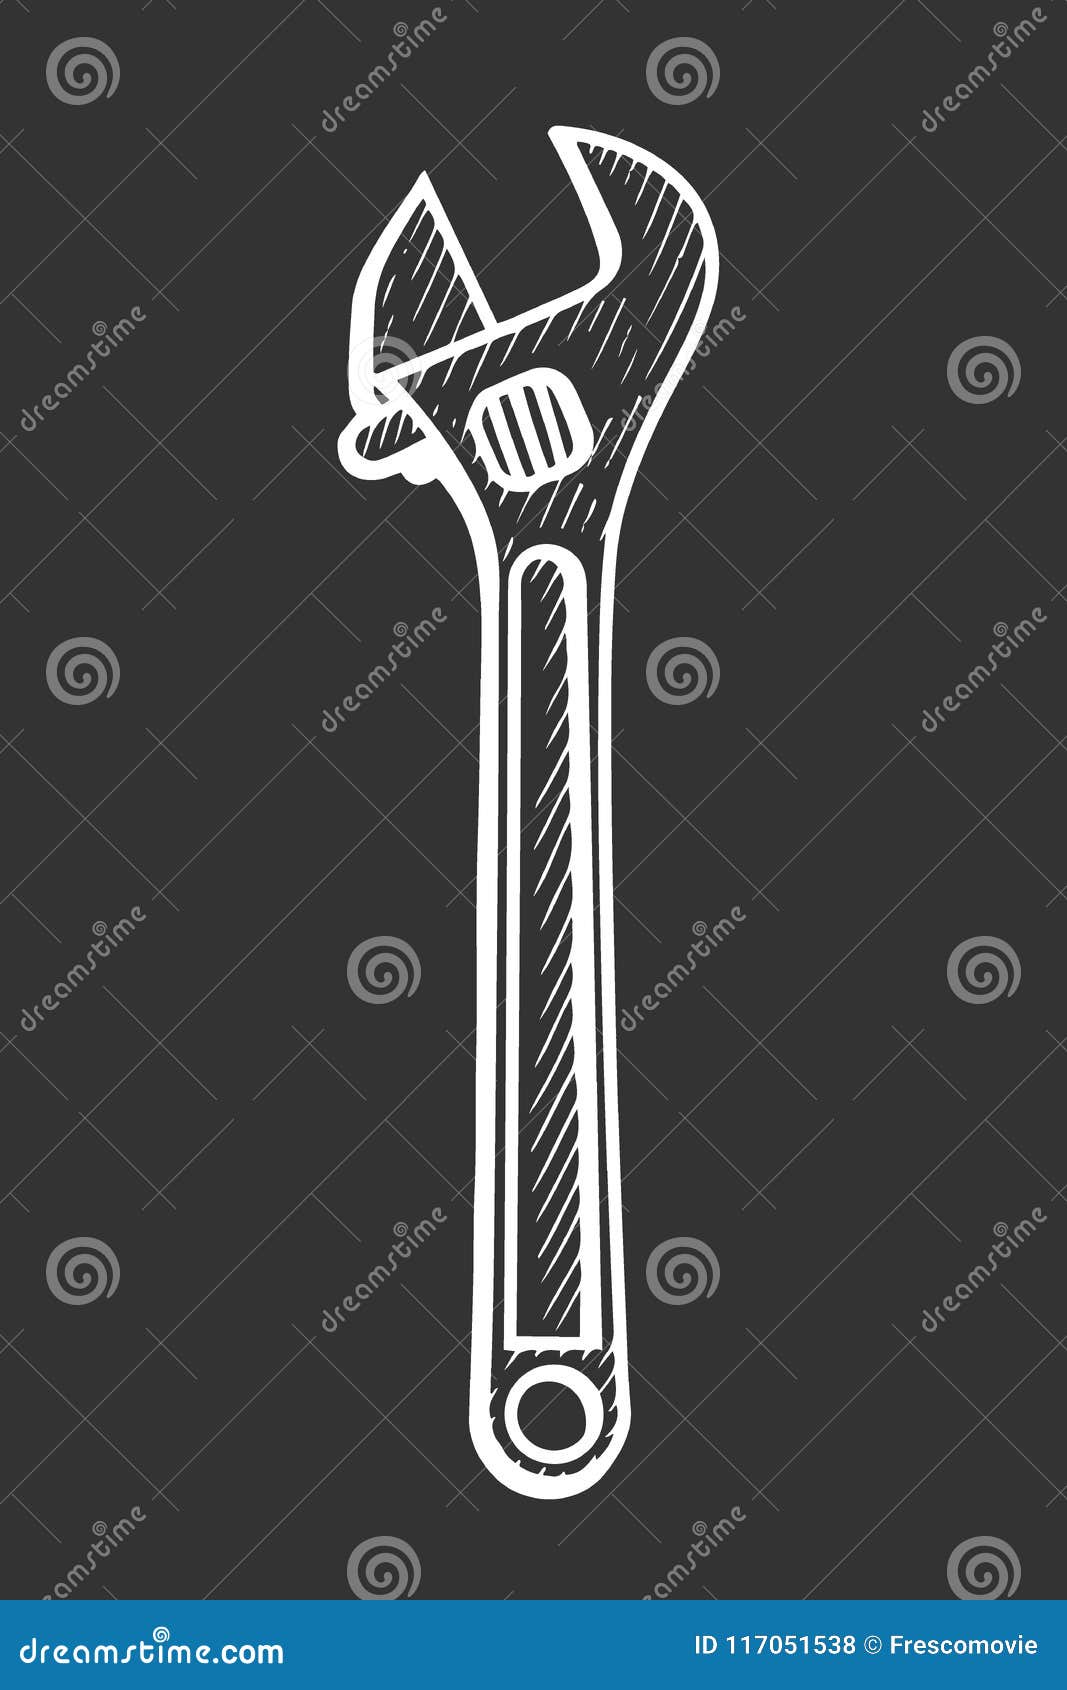 Adjustable Wrench Drawing HighRes Vector Graphic  Getty Images